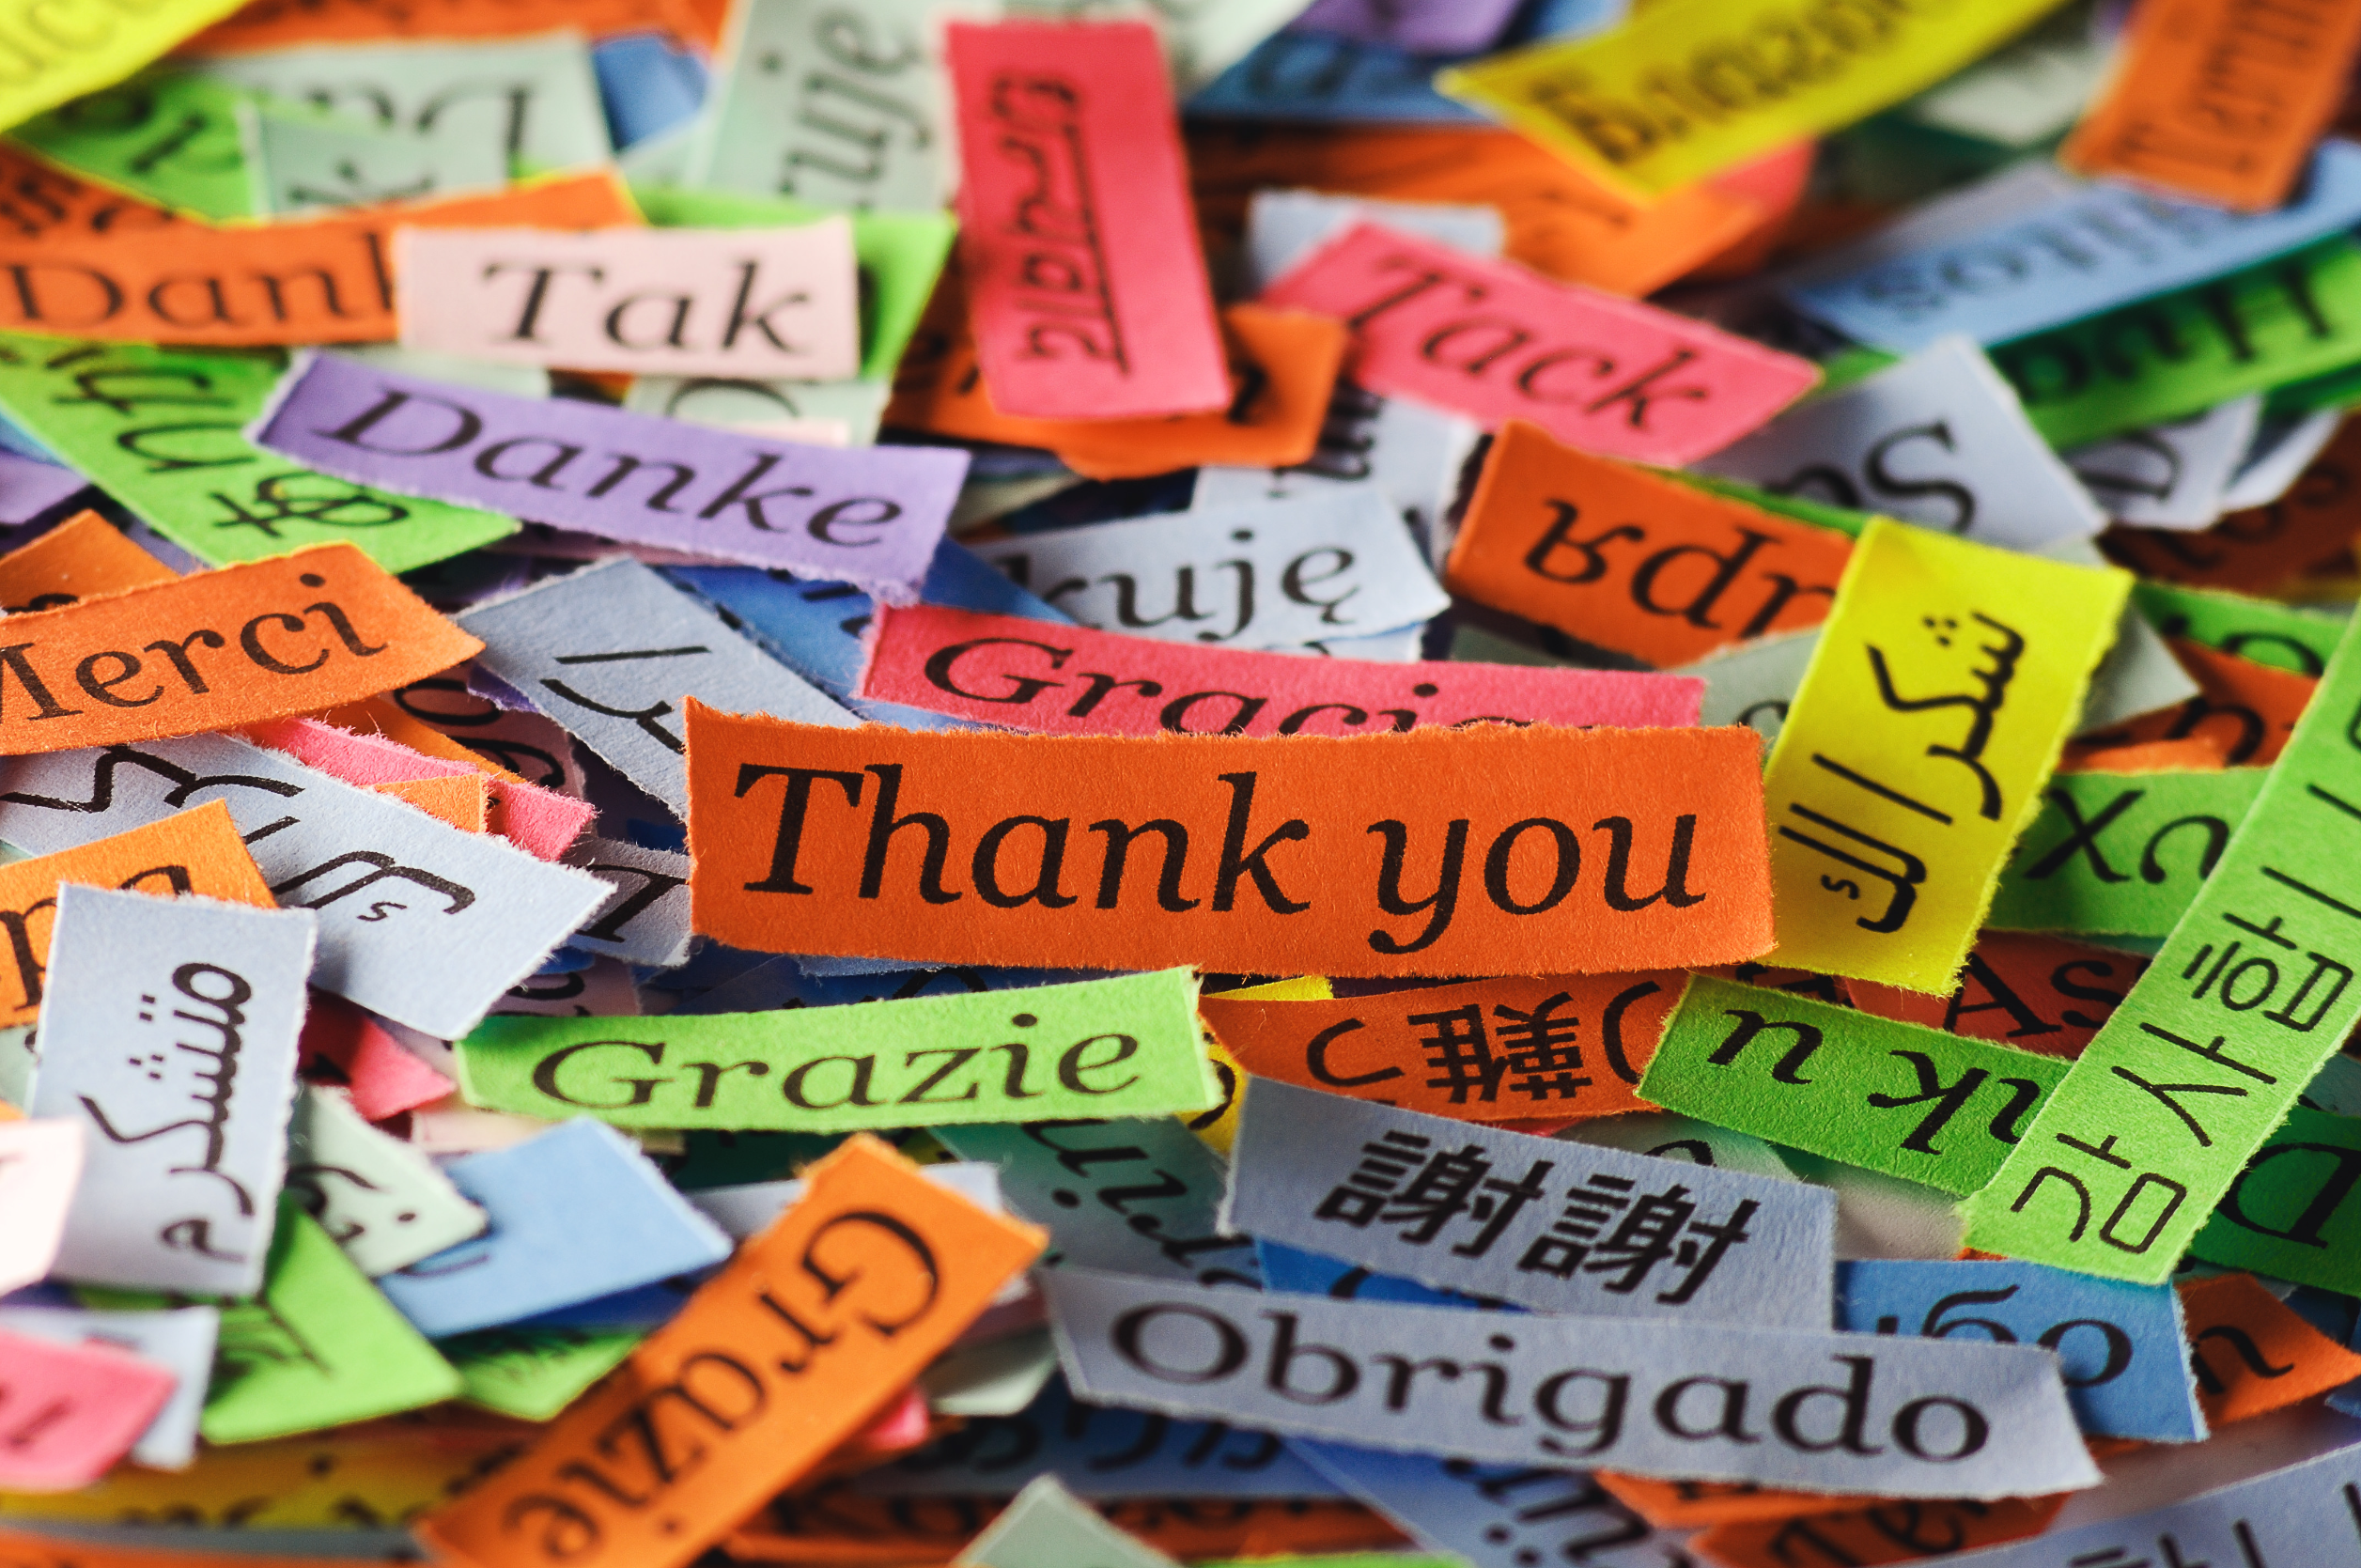 Thank you on colourful pieces of paper written in many languages